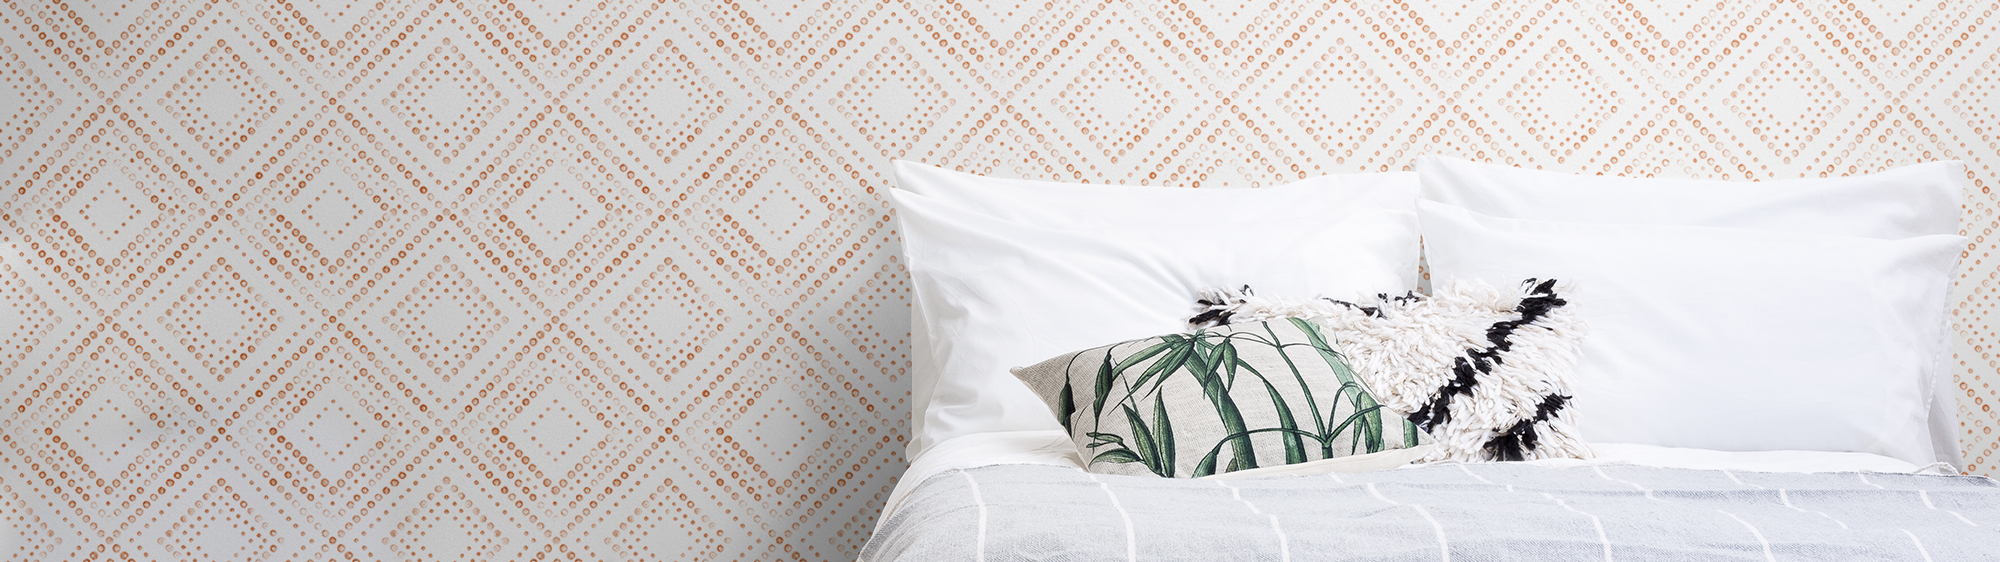 Complete A Cute Boho Look With These Boho Bedroom Wallpaper